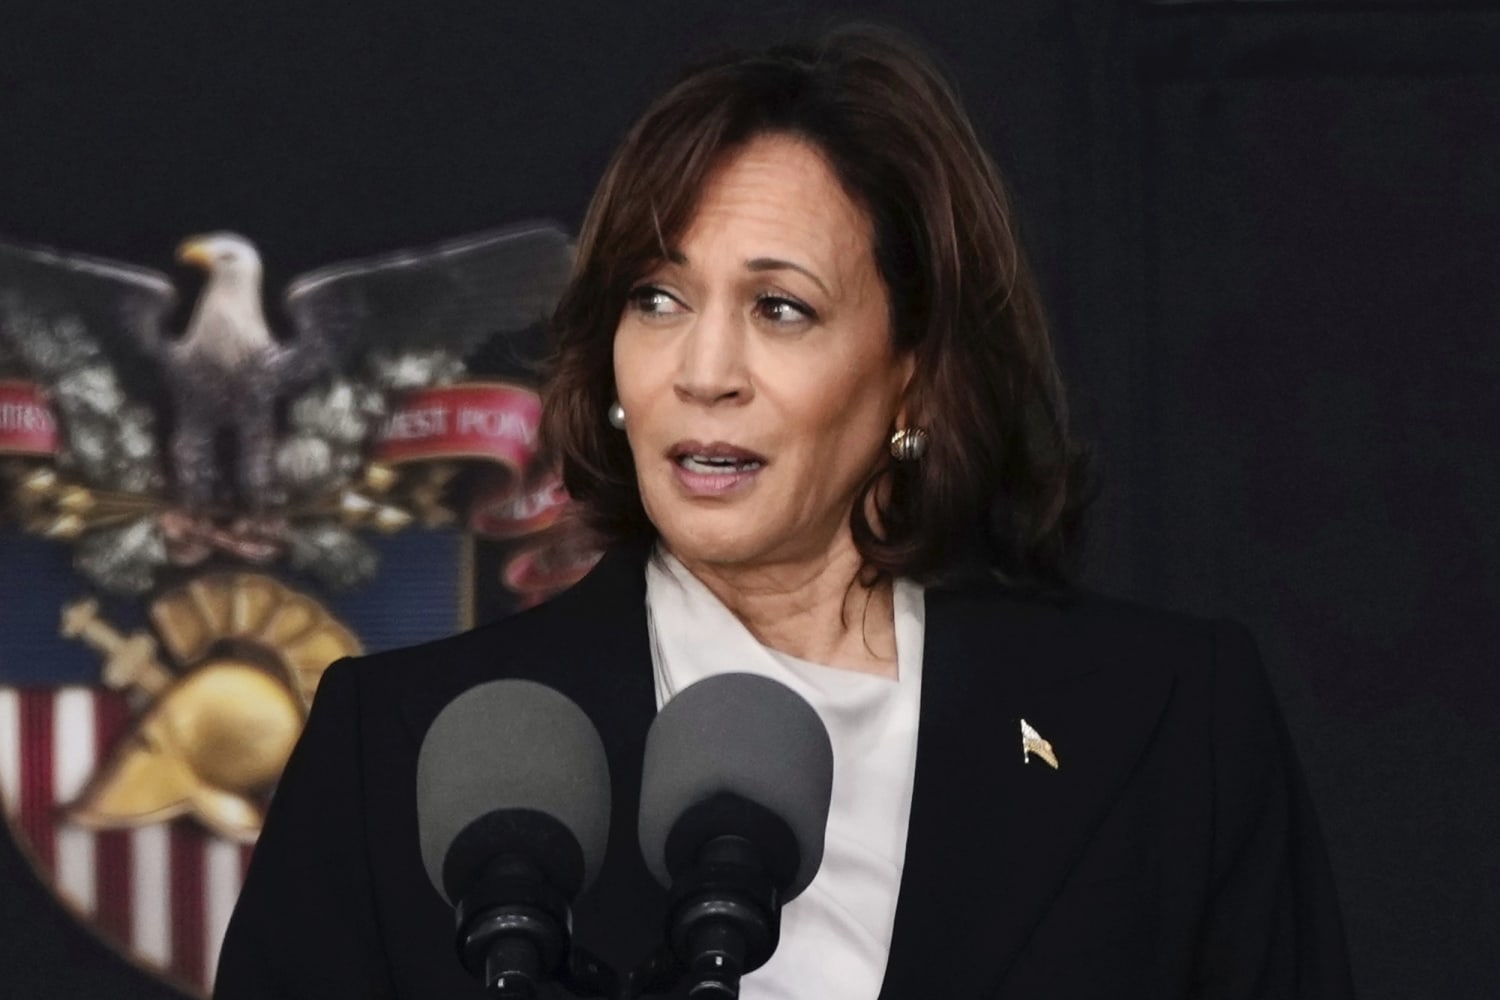 Harris, 1st woman to give commencement speech at West Point, welcomes cadets to ‘unsettled world’